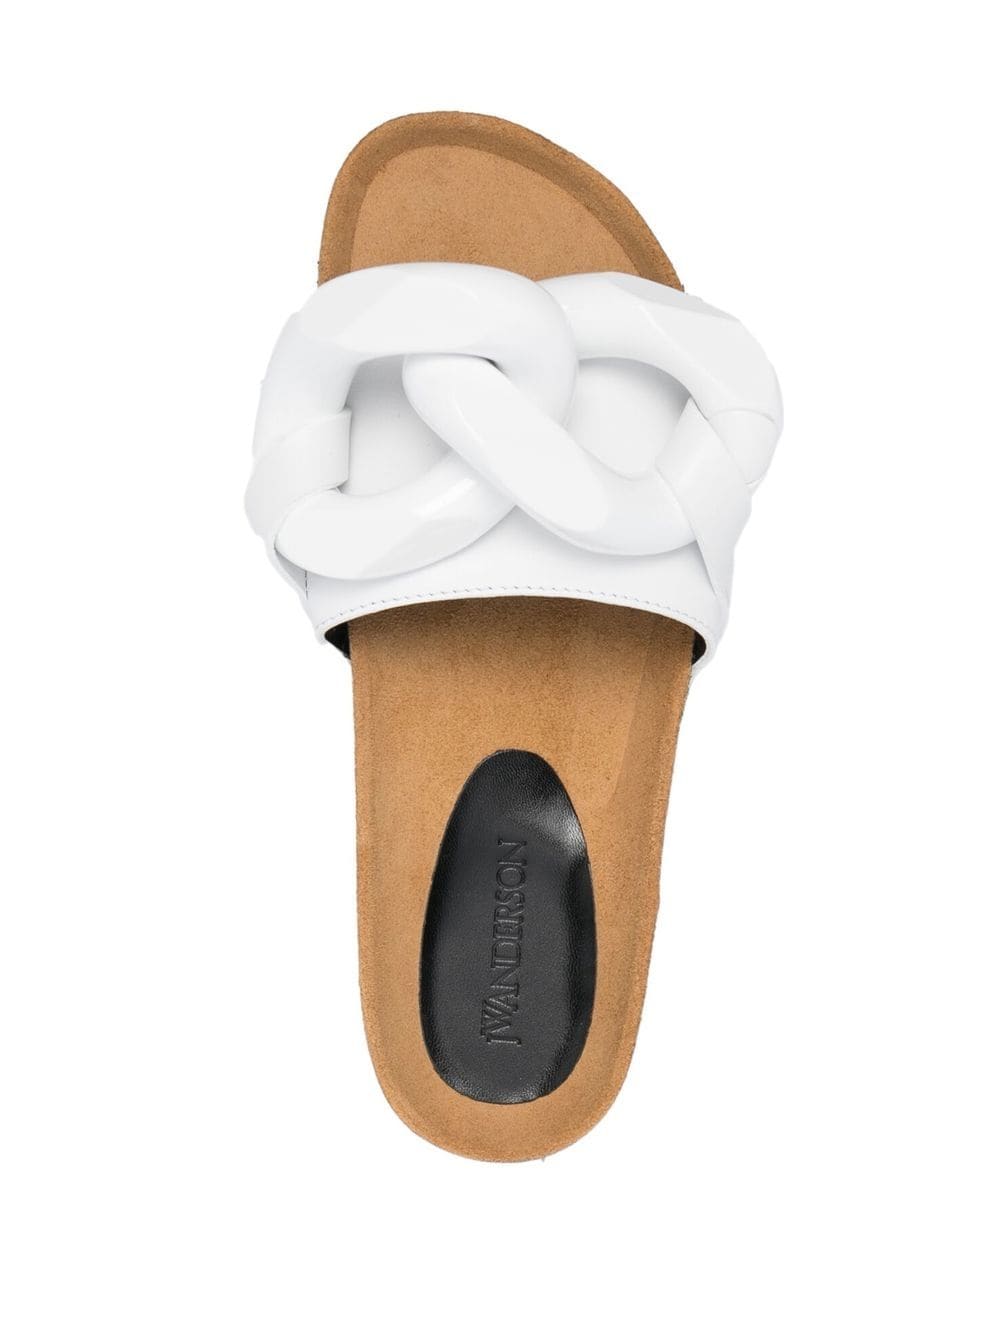 JW Anderson chain-link leather slides